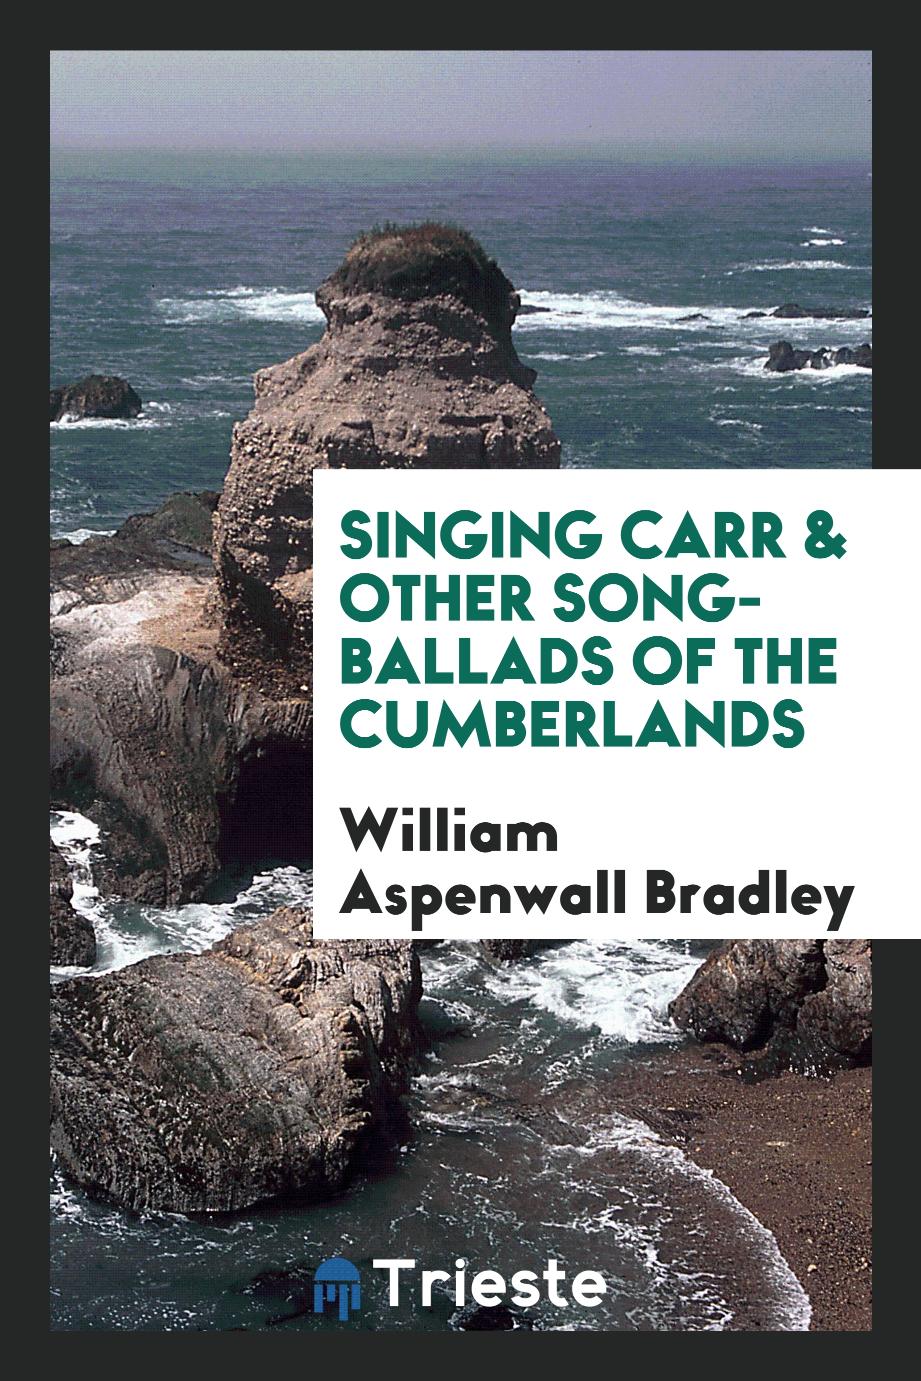 Singing Carr & other song-ballads of the Cumberlands